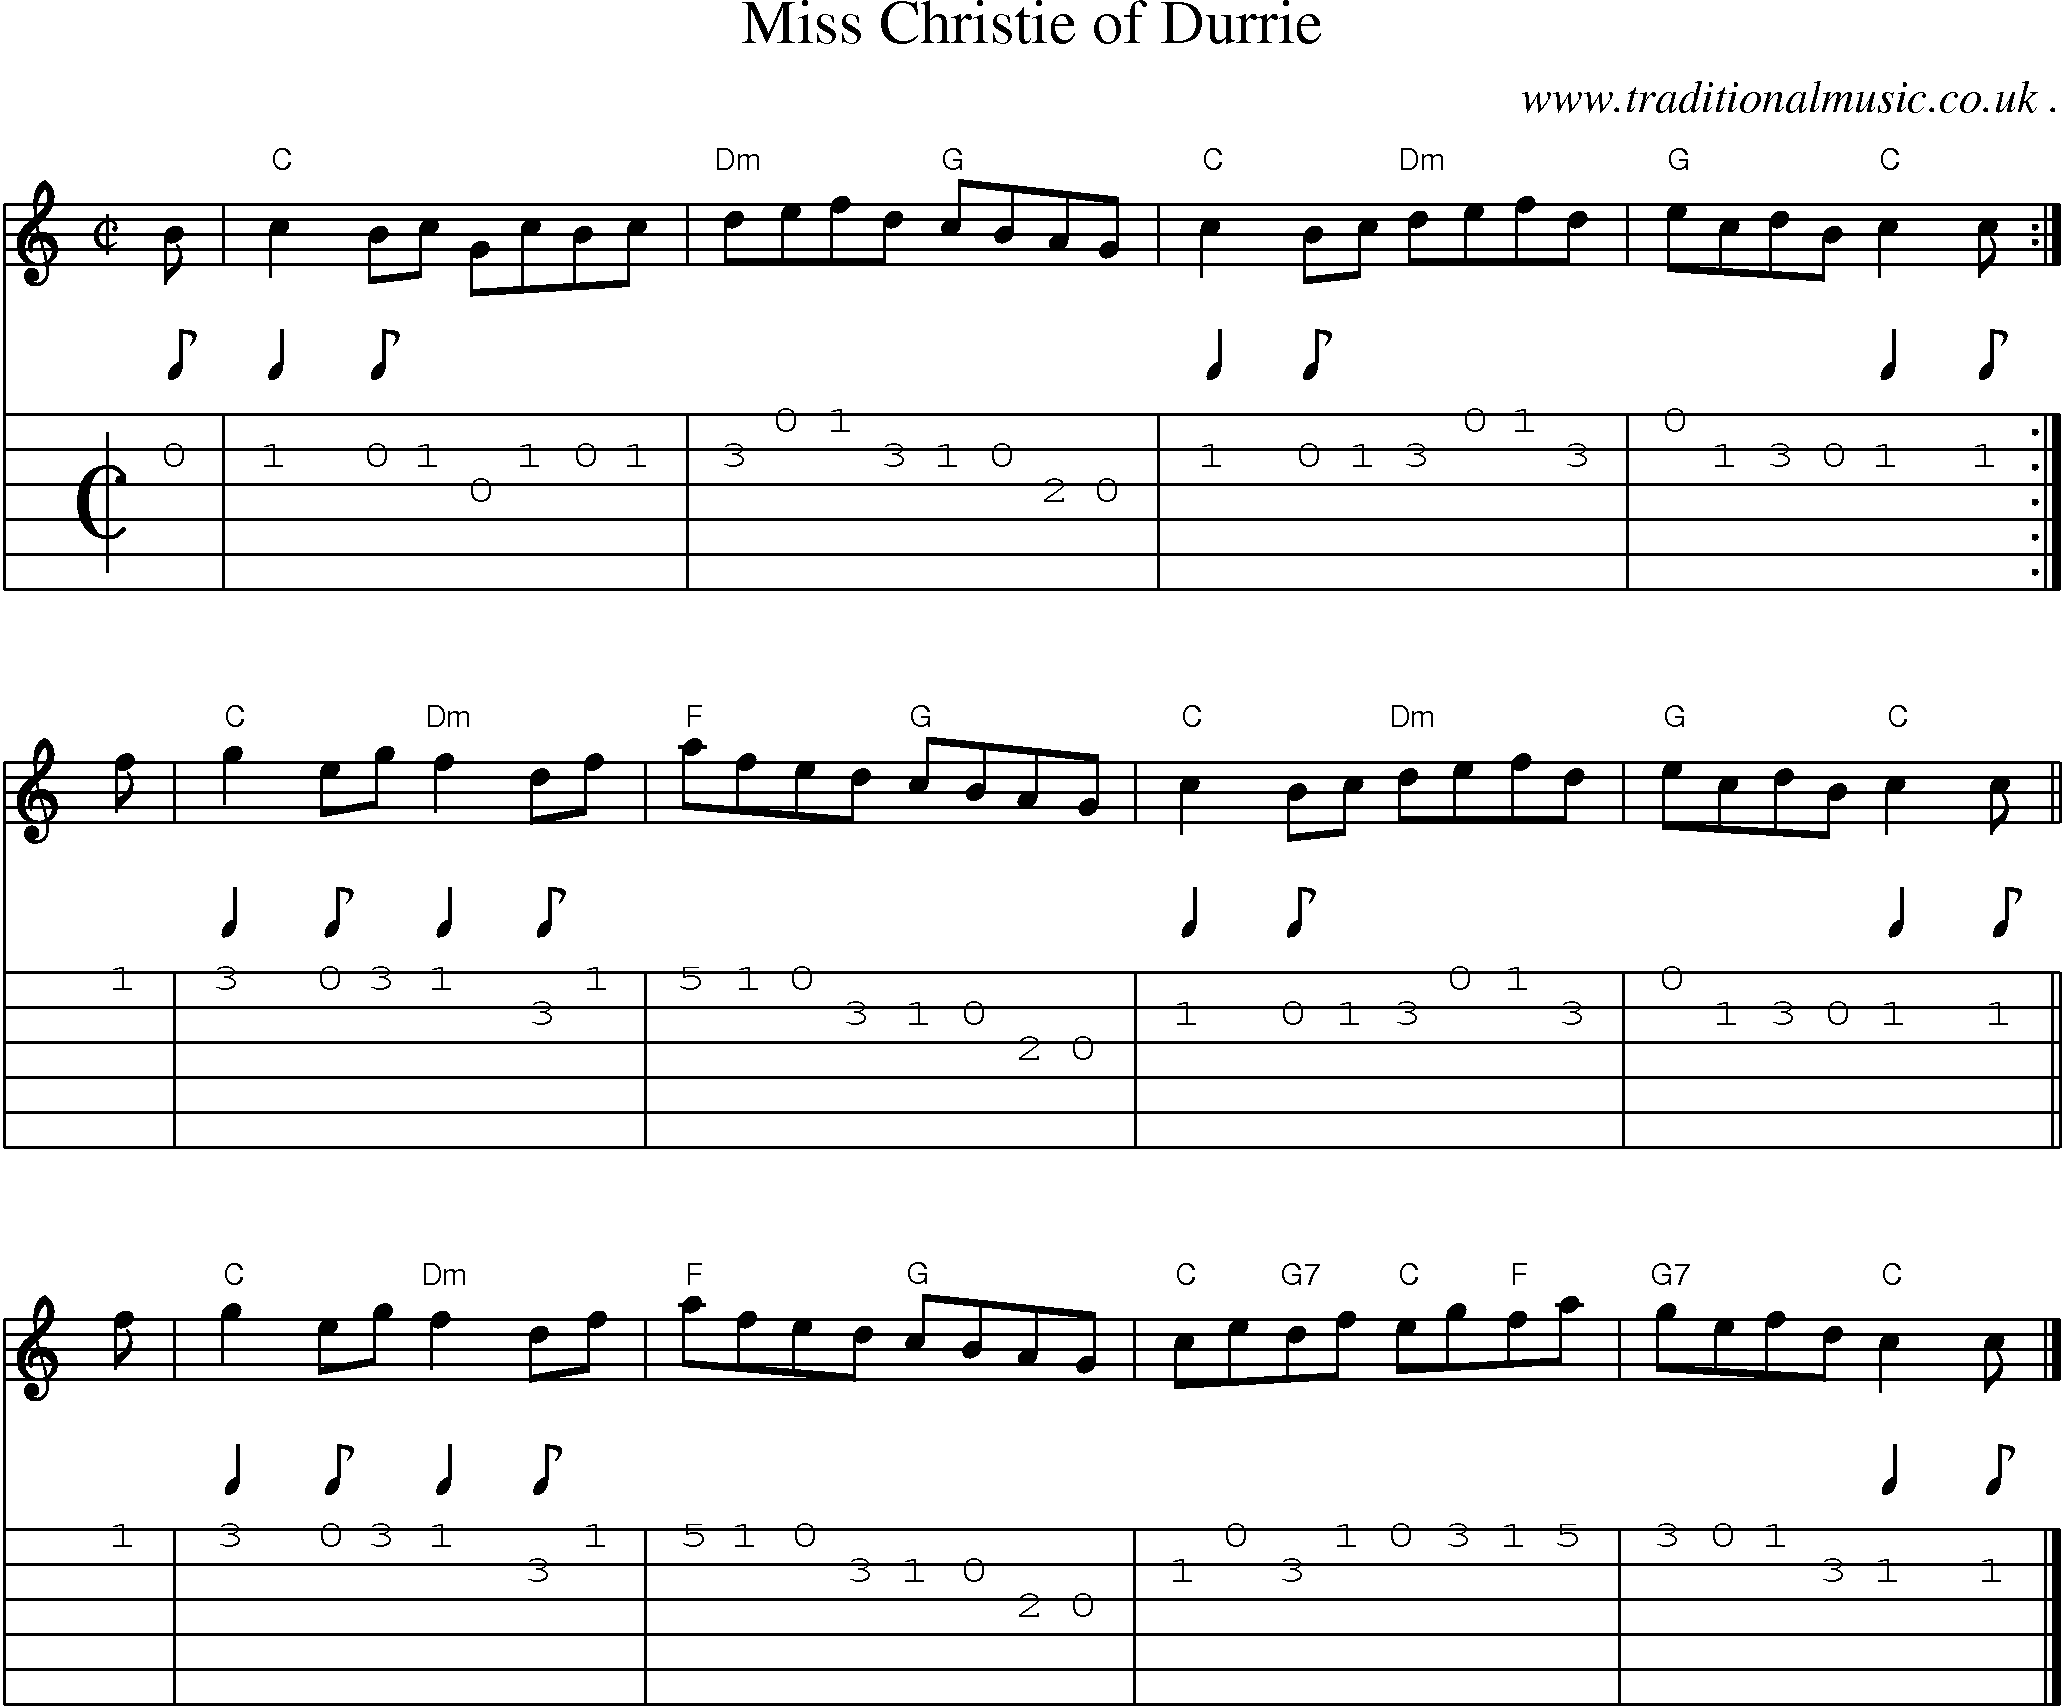 Sheet-music  score, Chords and Guitar Tabs for Miss Christie Of Durrie